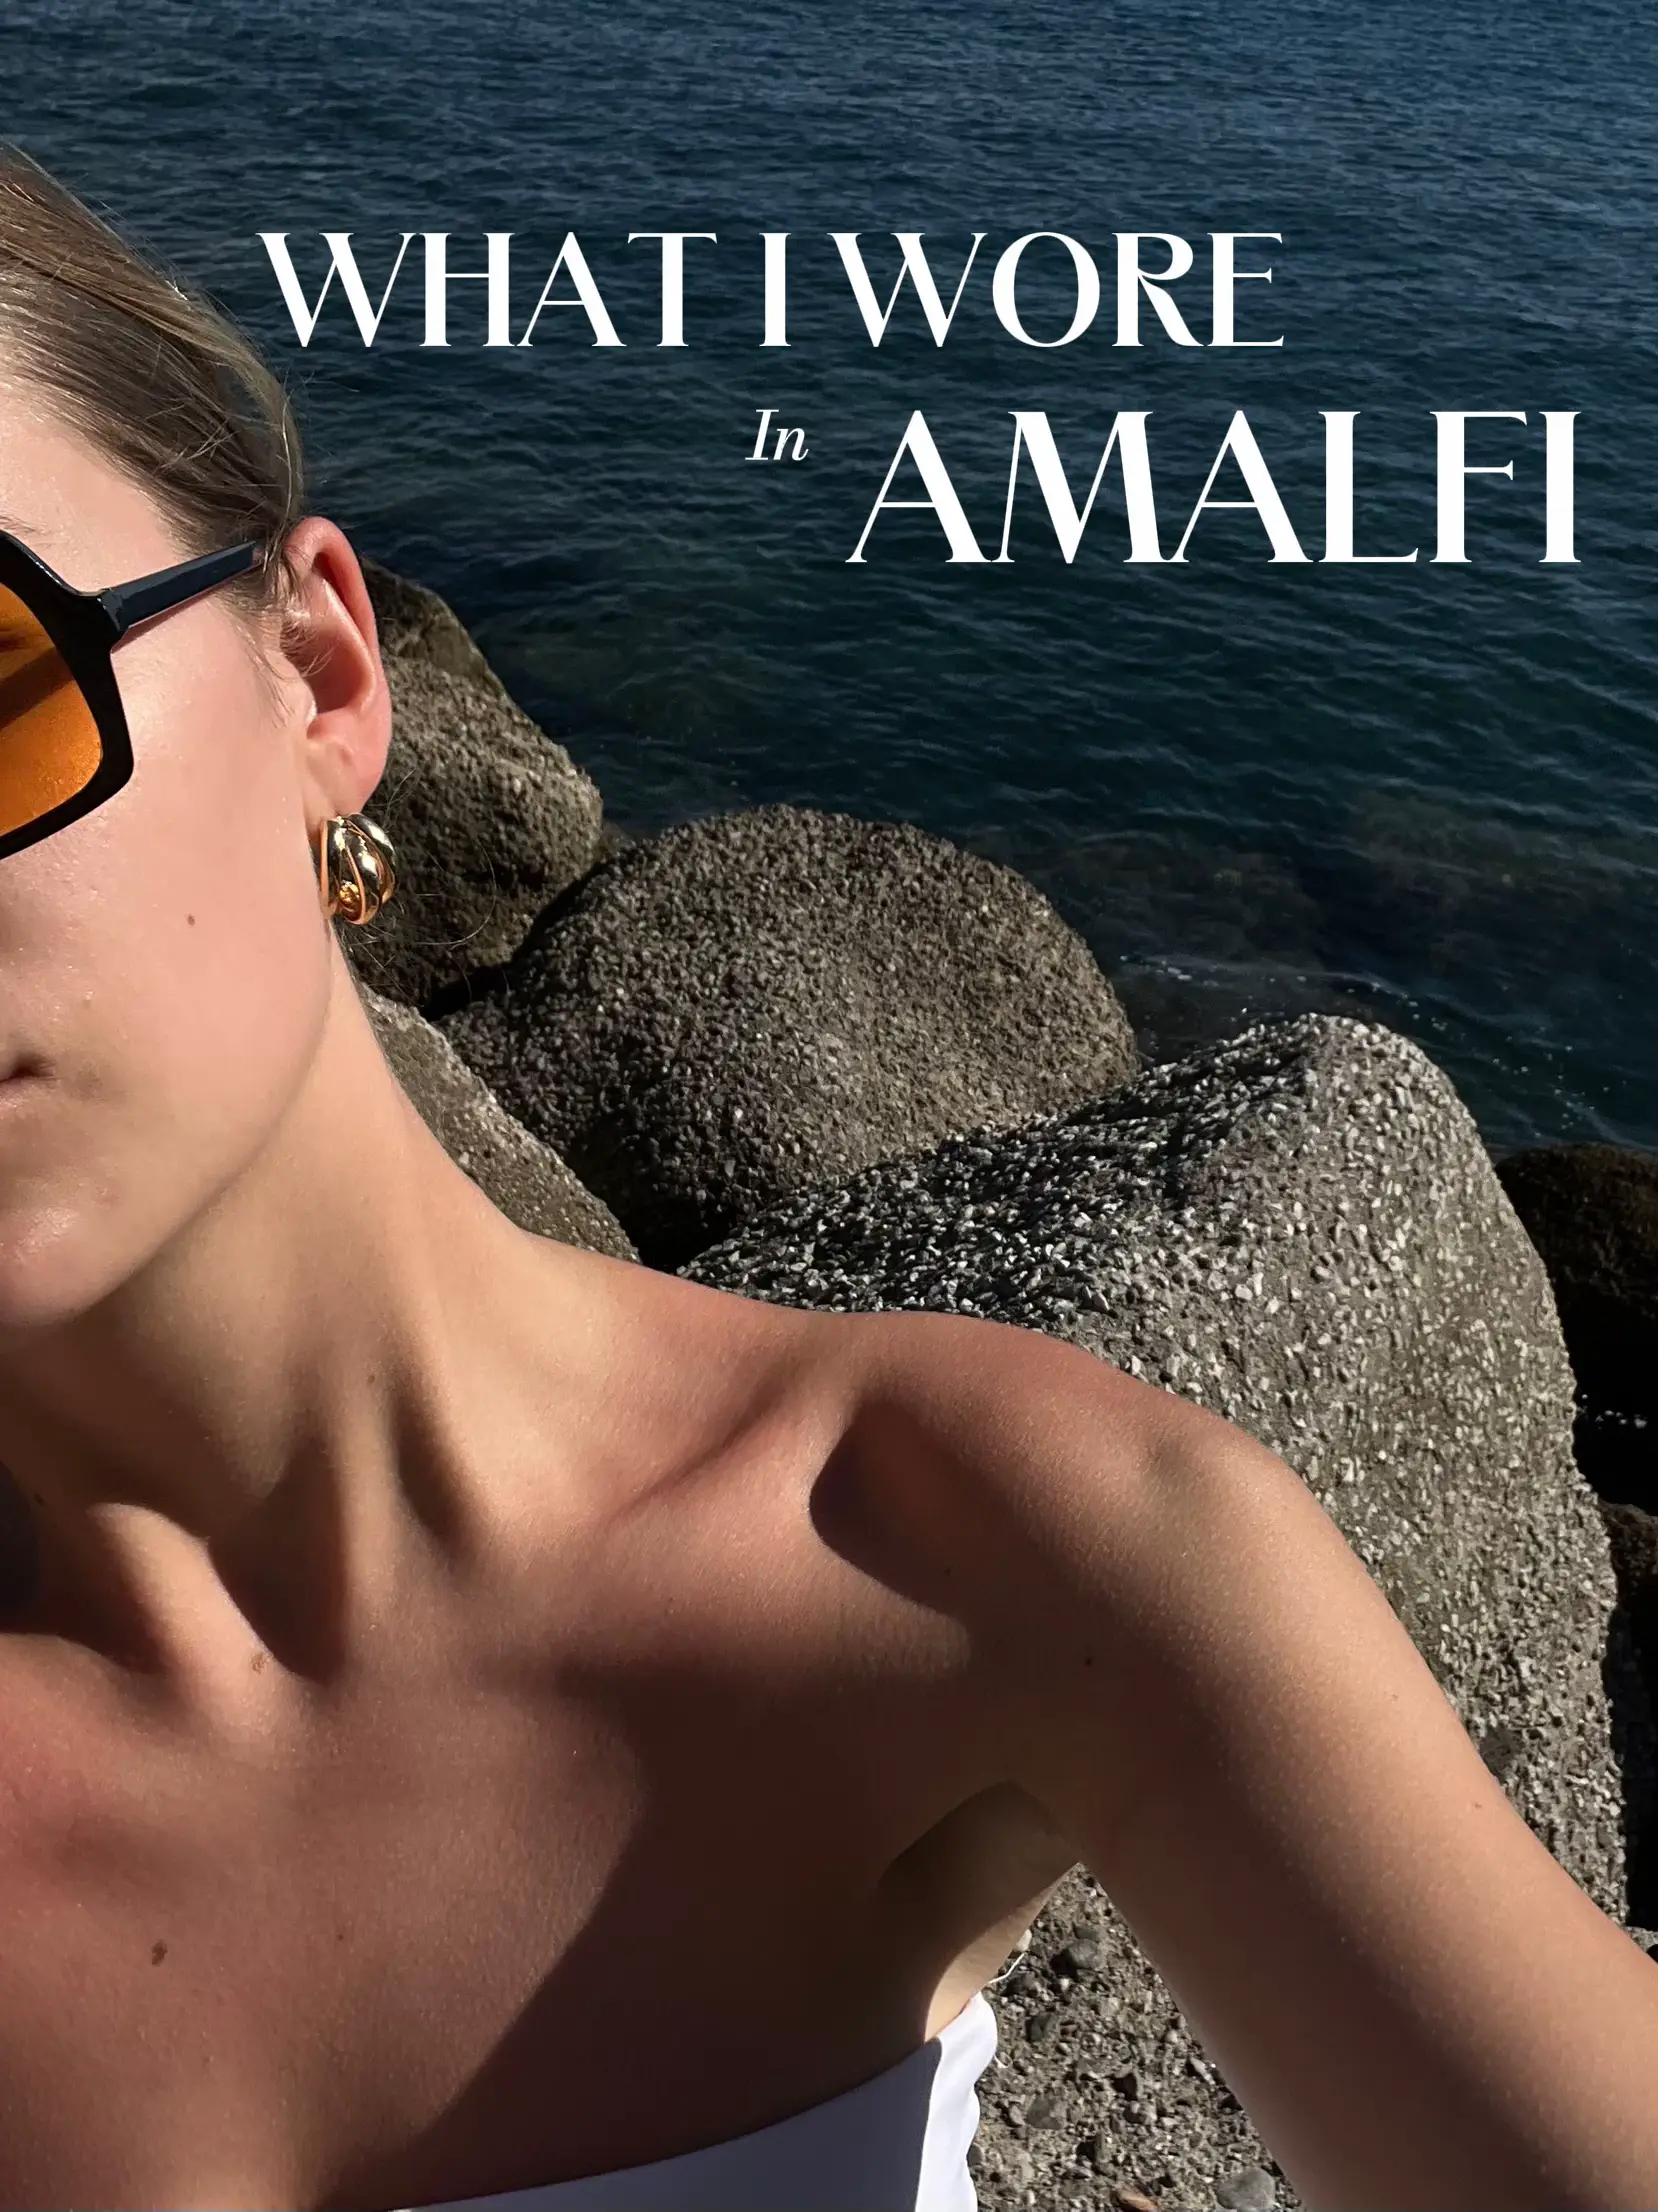 WHAT I WORE IN AMALFI's images